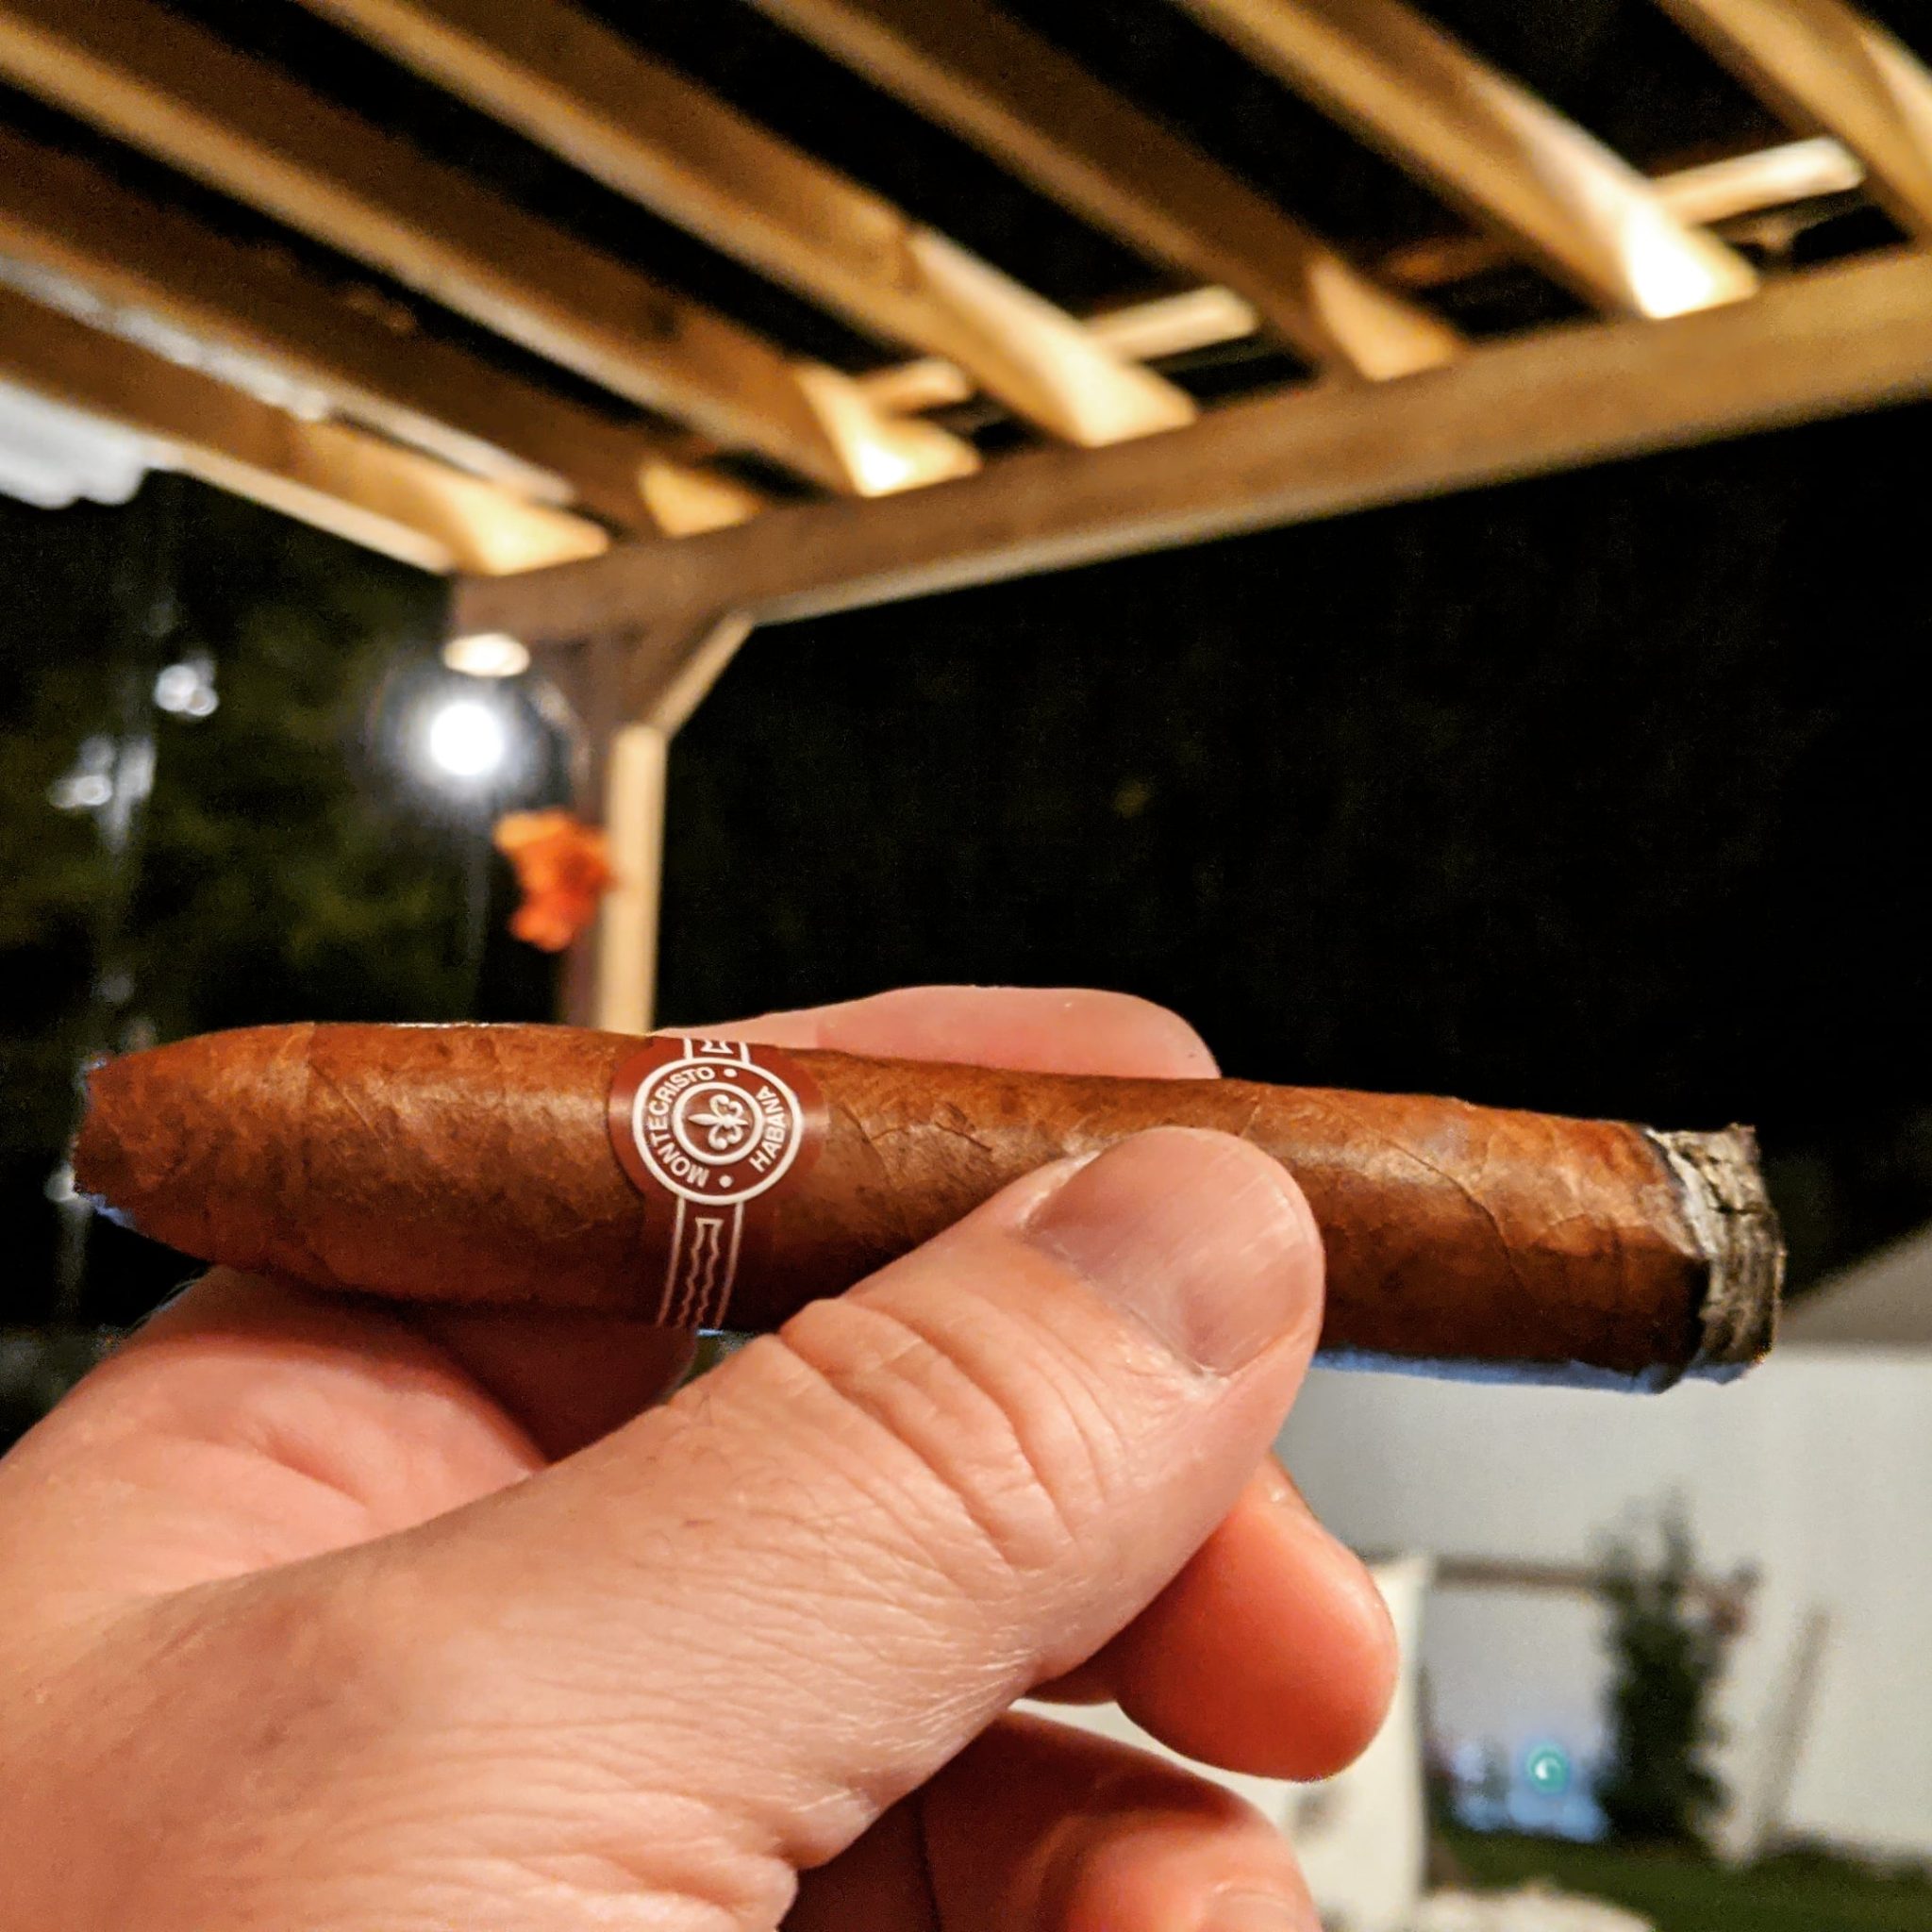 Monte Cristo cigar from Cuba, lit and in left hand